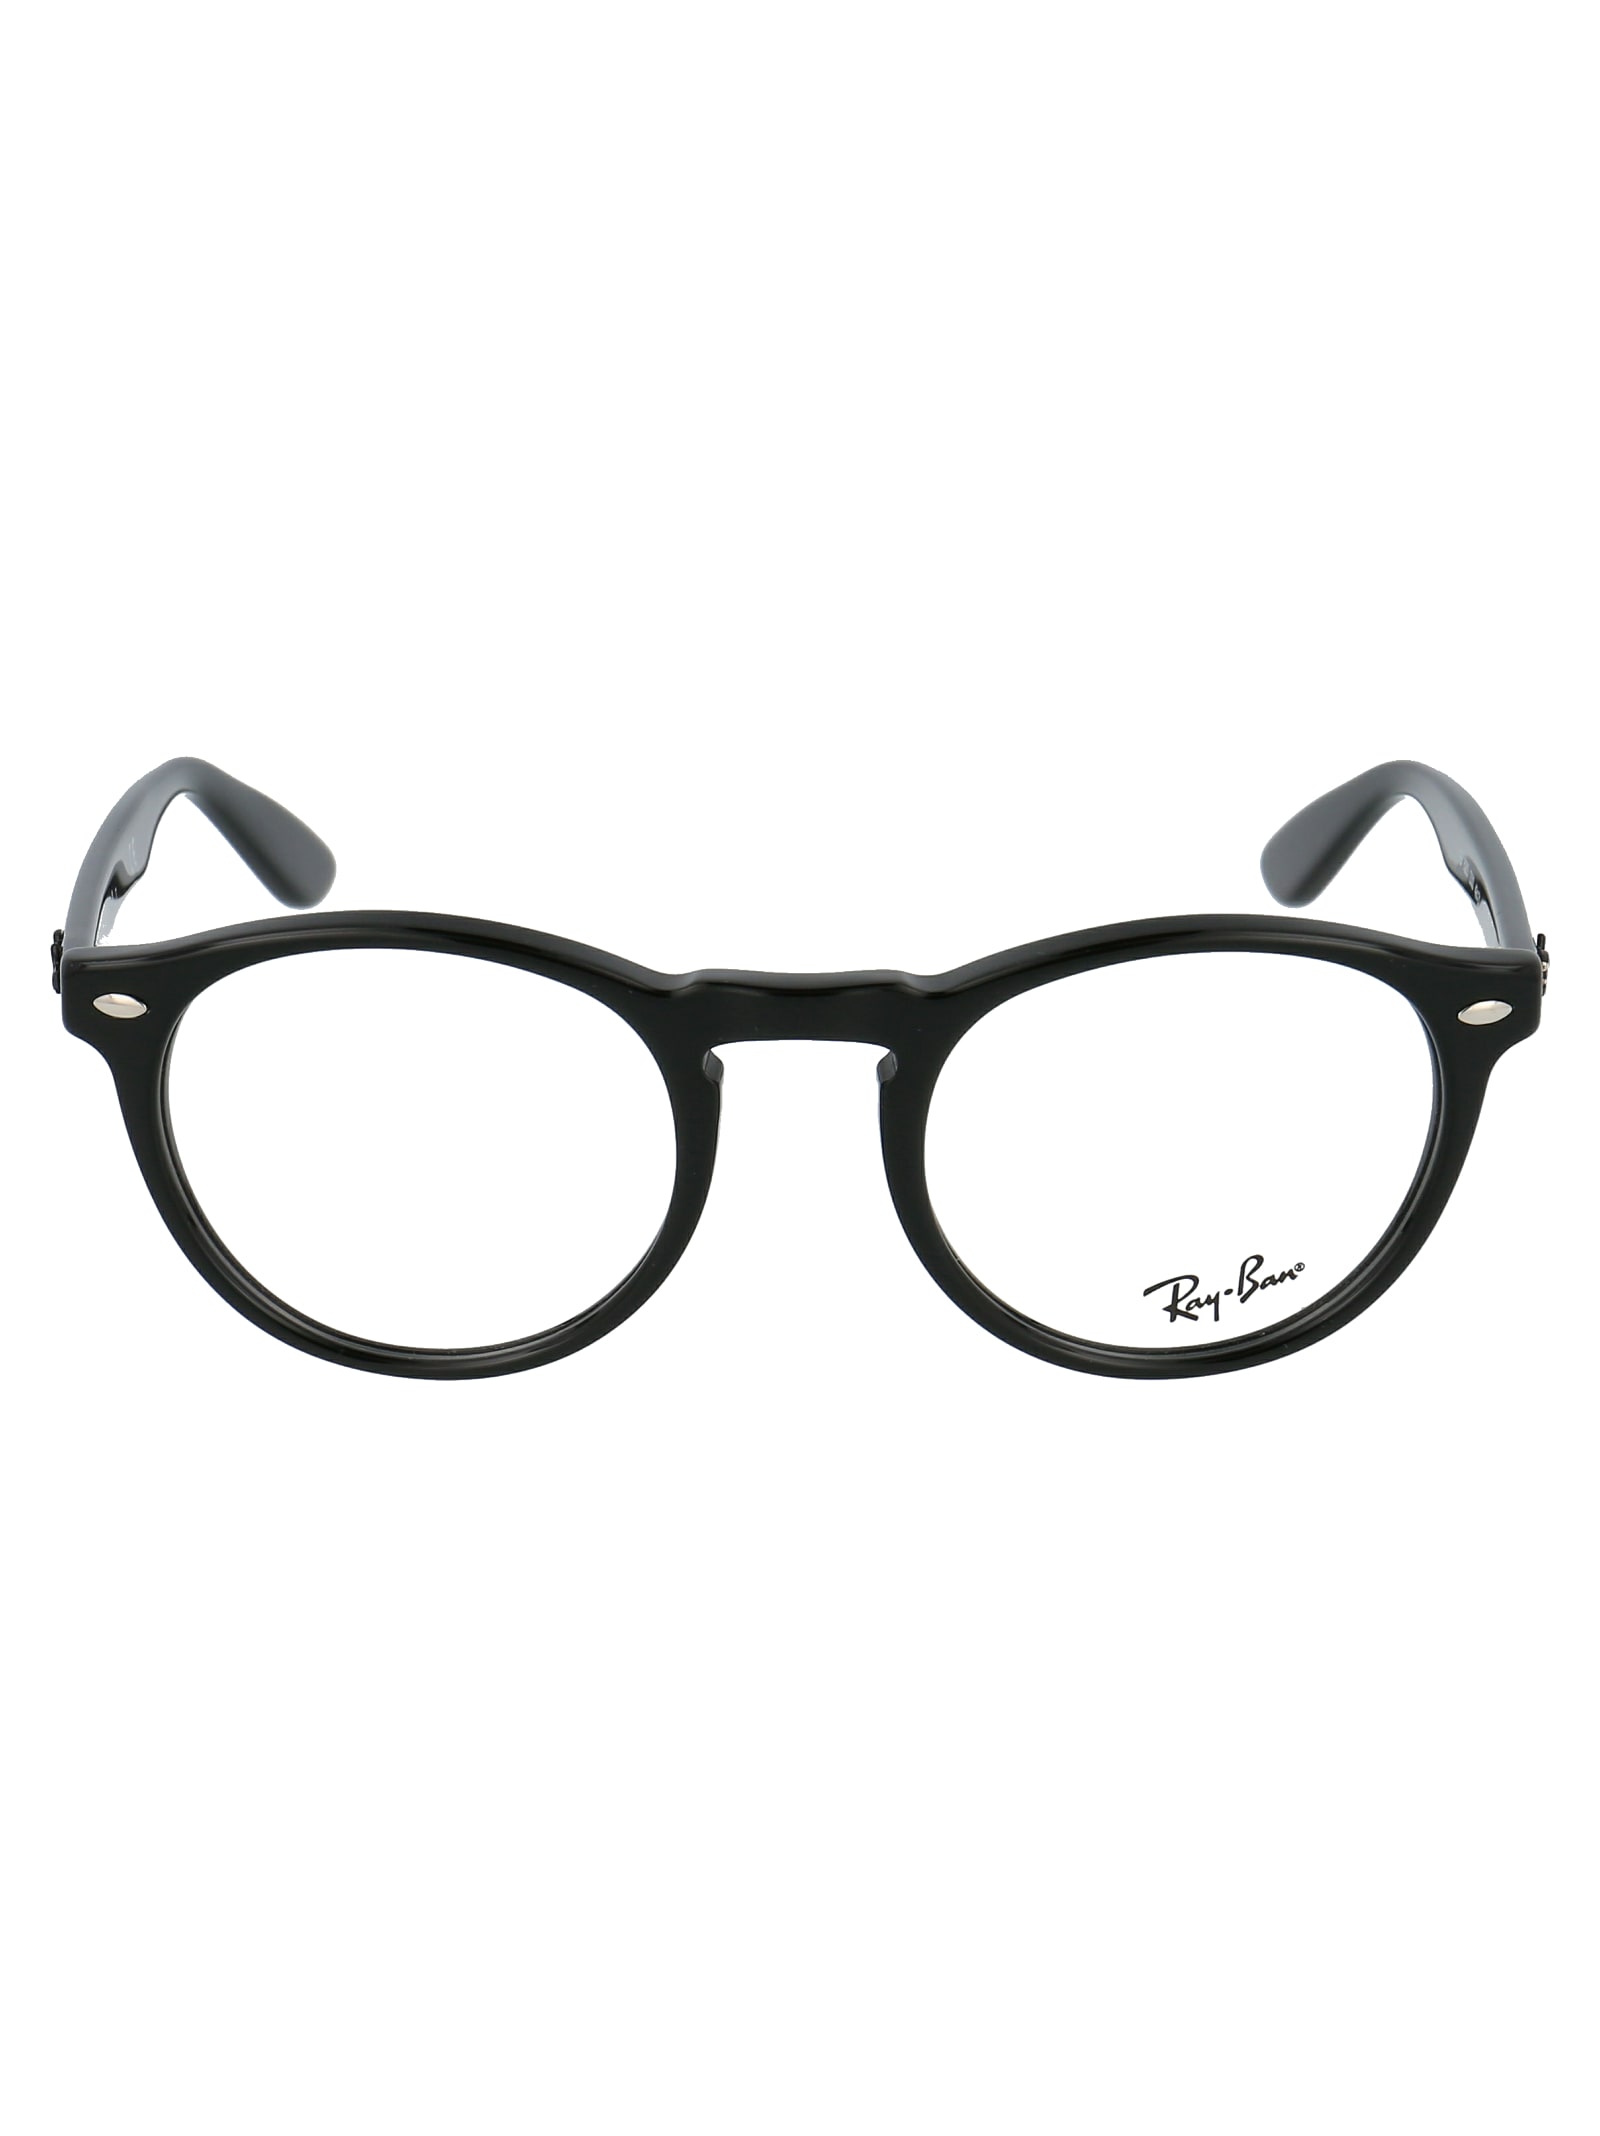 Ray Ban 0rx5283 Glasses In 2000 Black